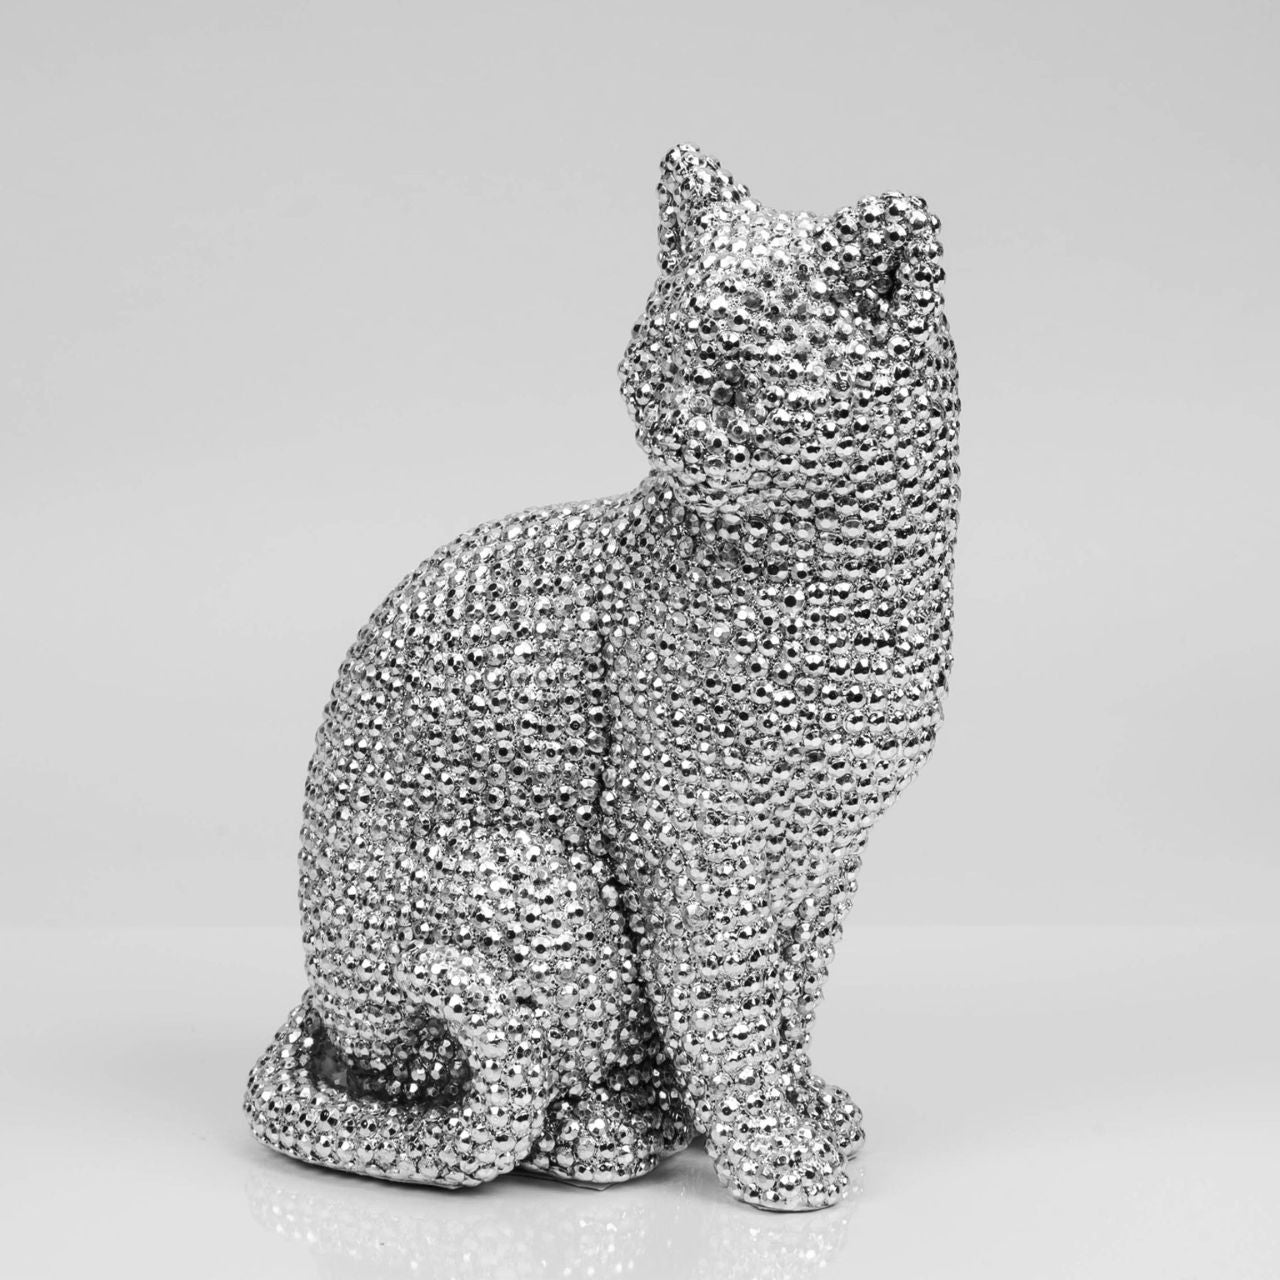 Bring some extra special sparkle to any space with this twinkling diamante effect sitting cat sculpture. From the HESTIA Silver Luxe collection - unparalleled glamour, style and elegance in contemporary home and gift.